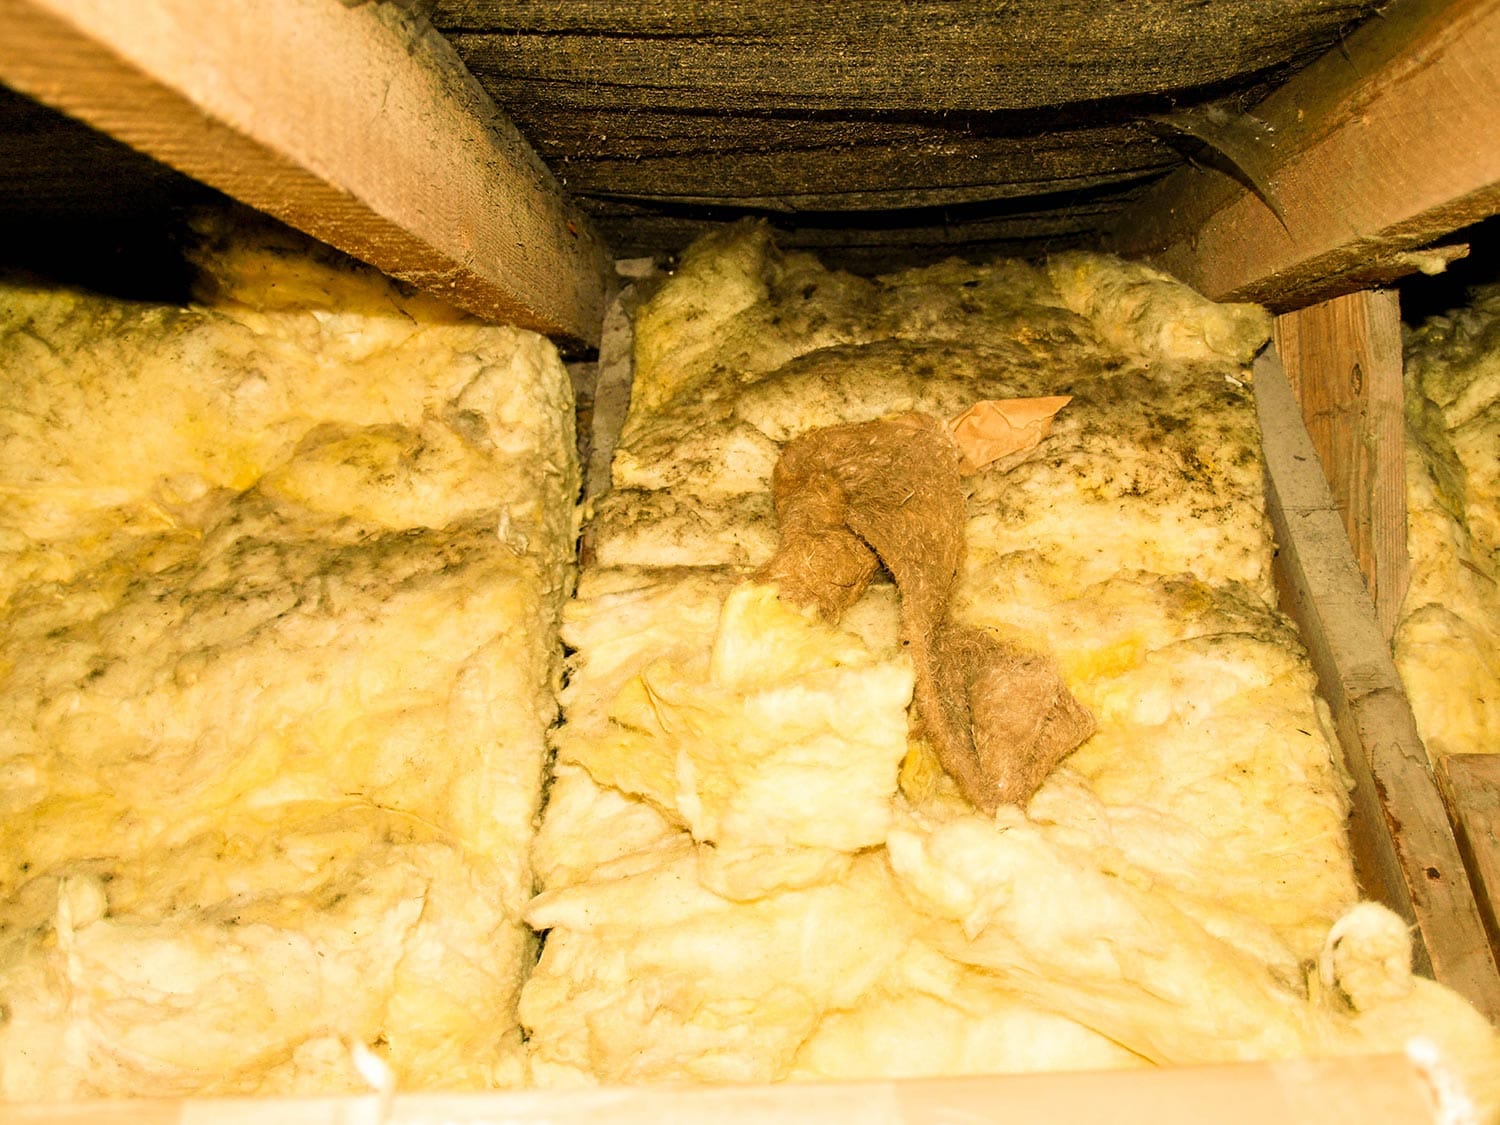 A typical household attic that is covered in mould spore